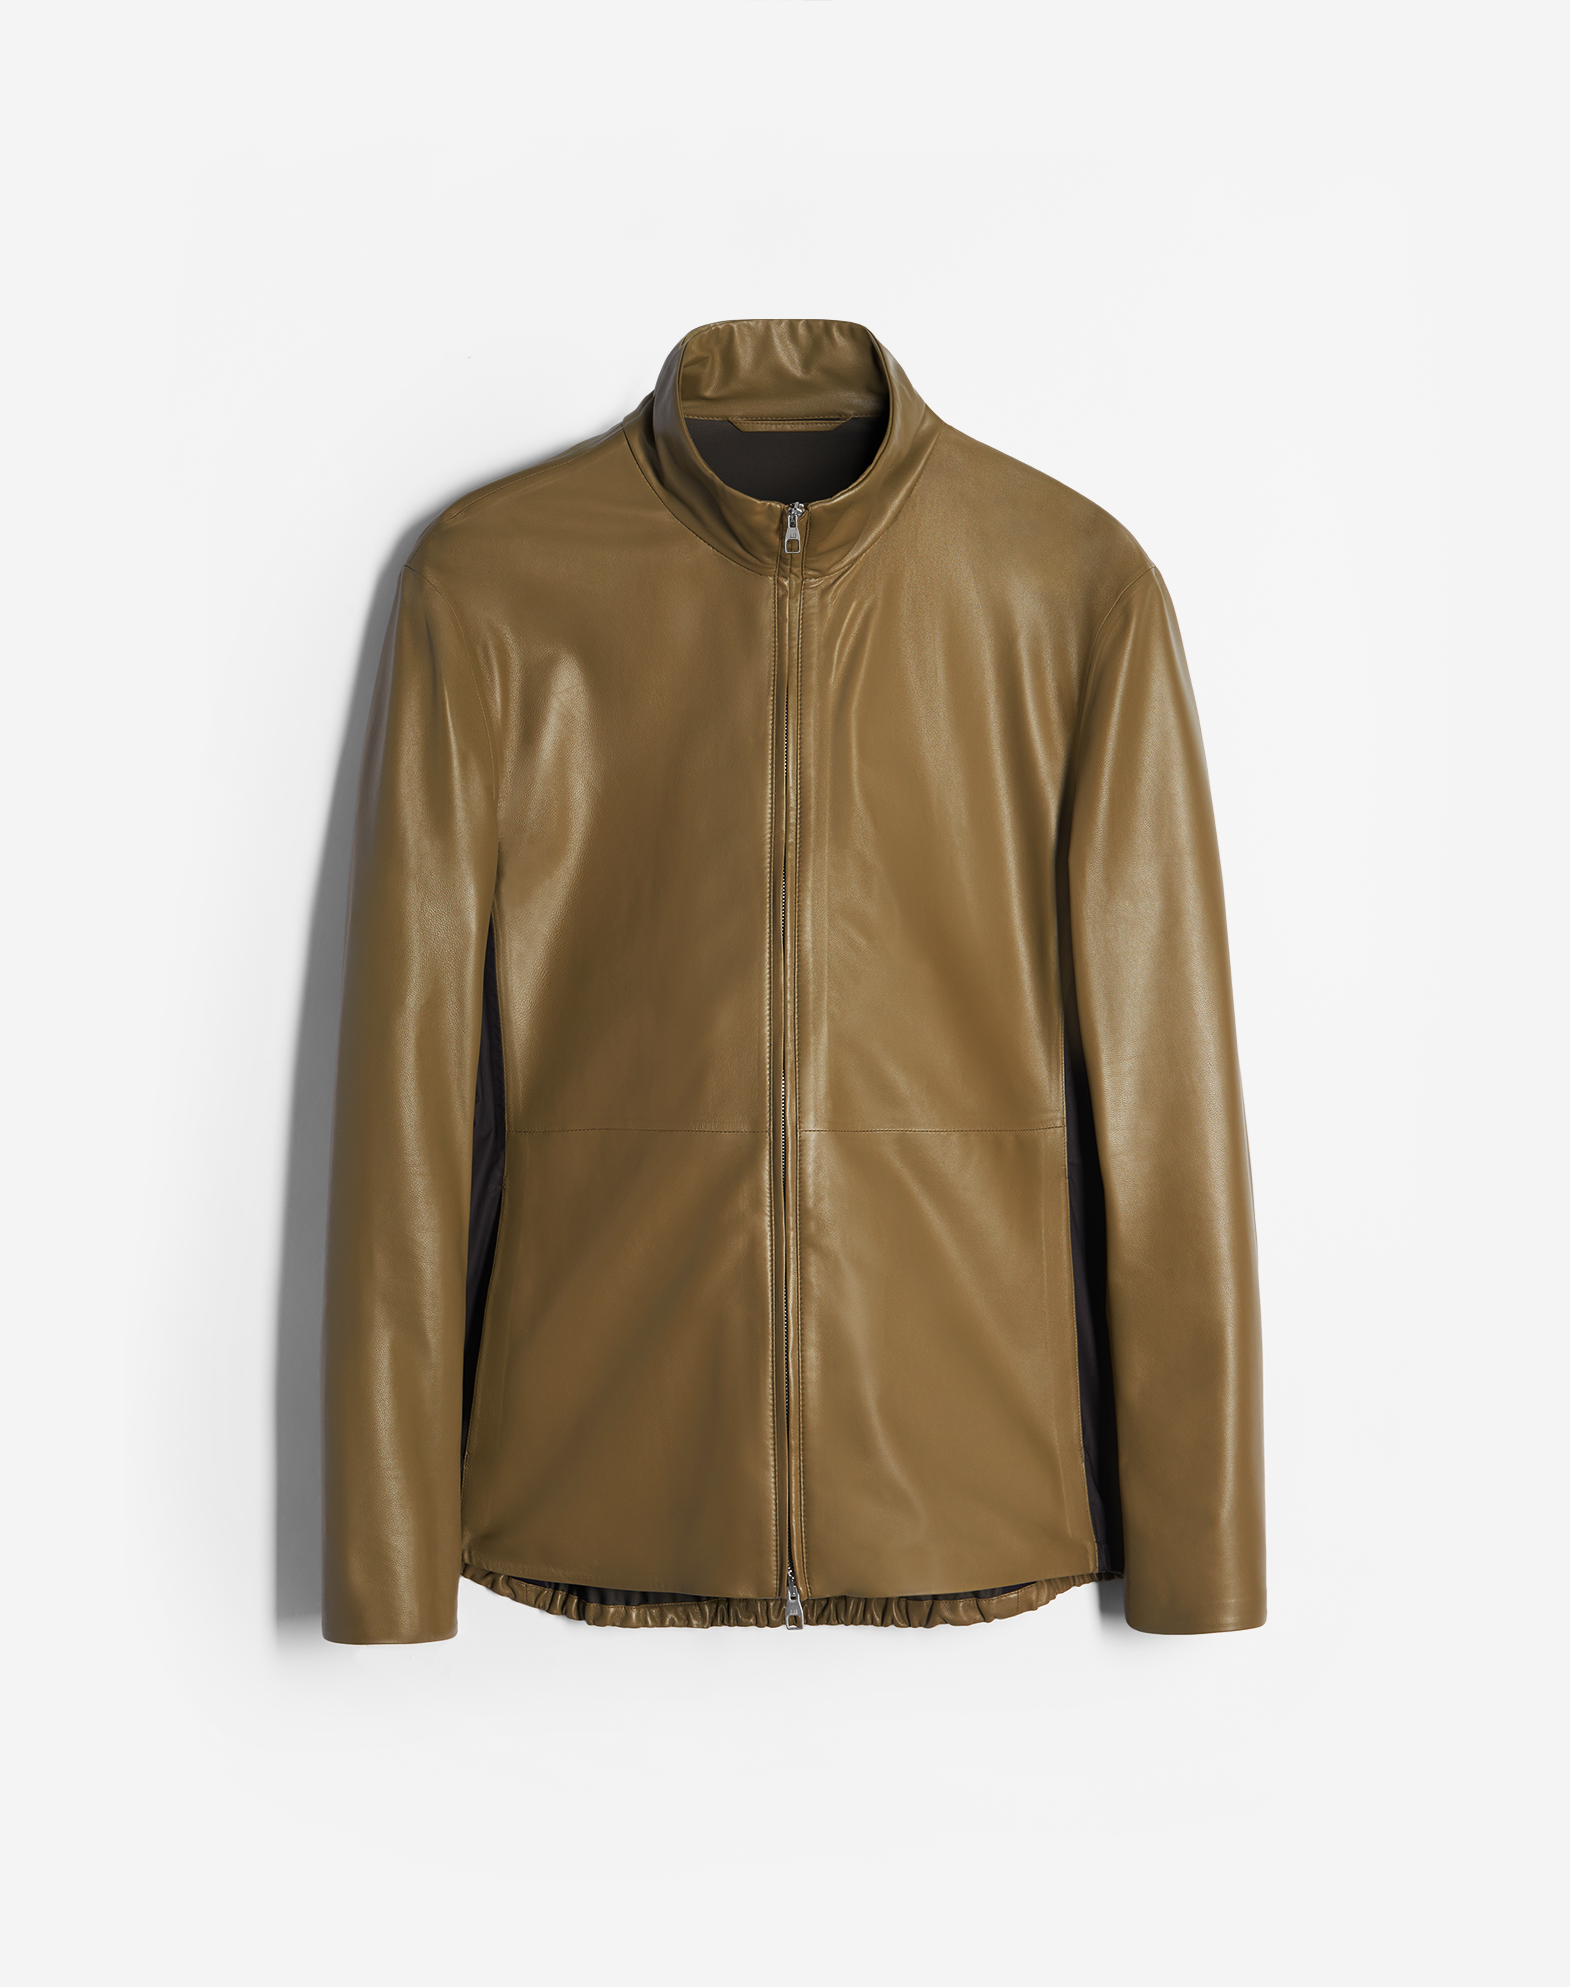 Dunhill Luxury Men's Leather Jackets